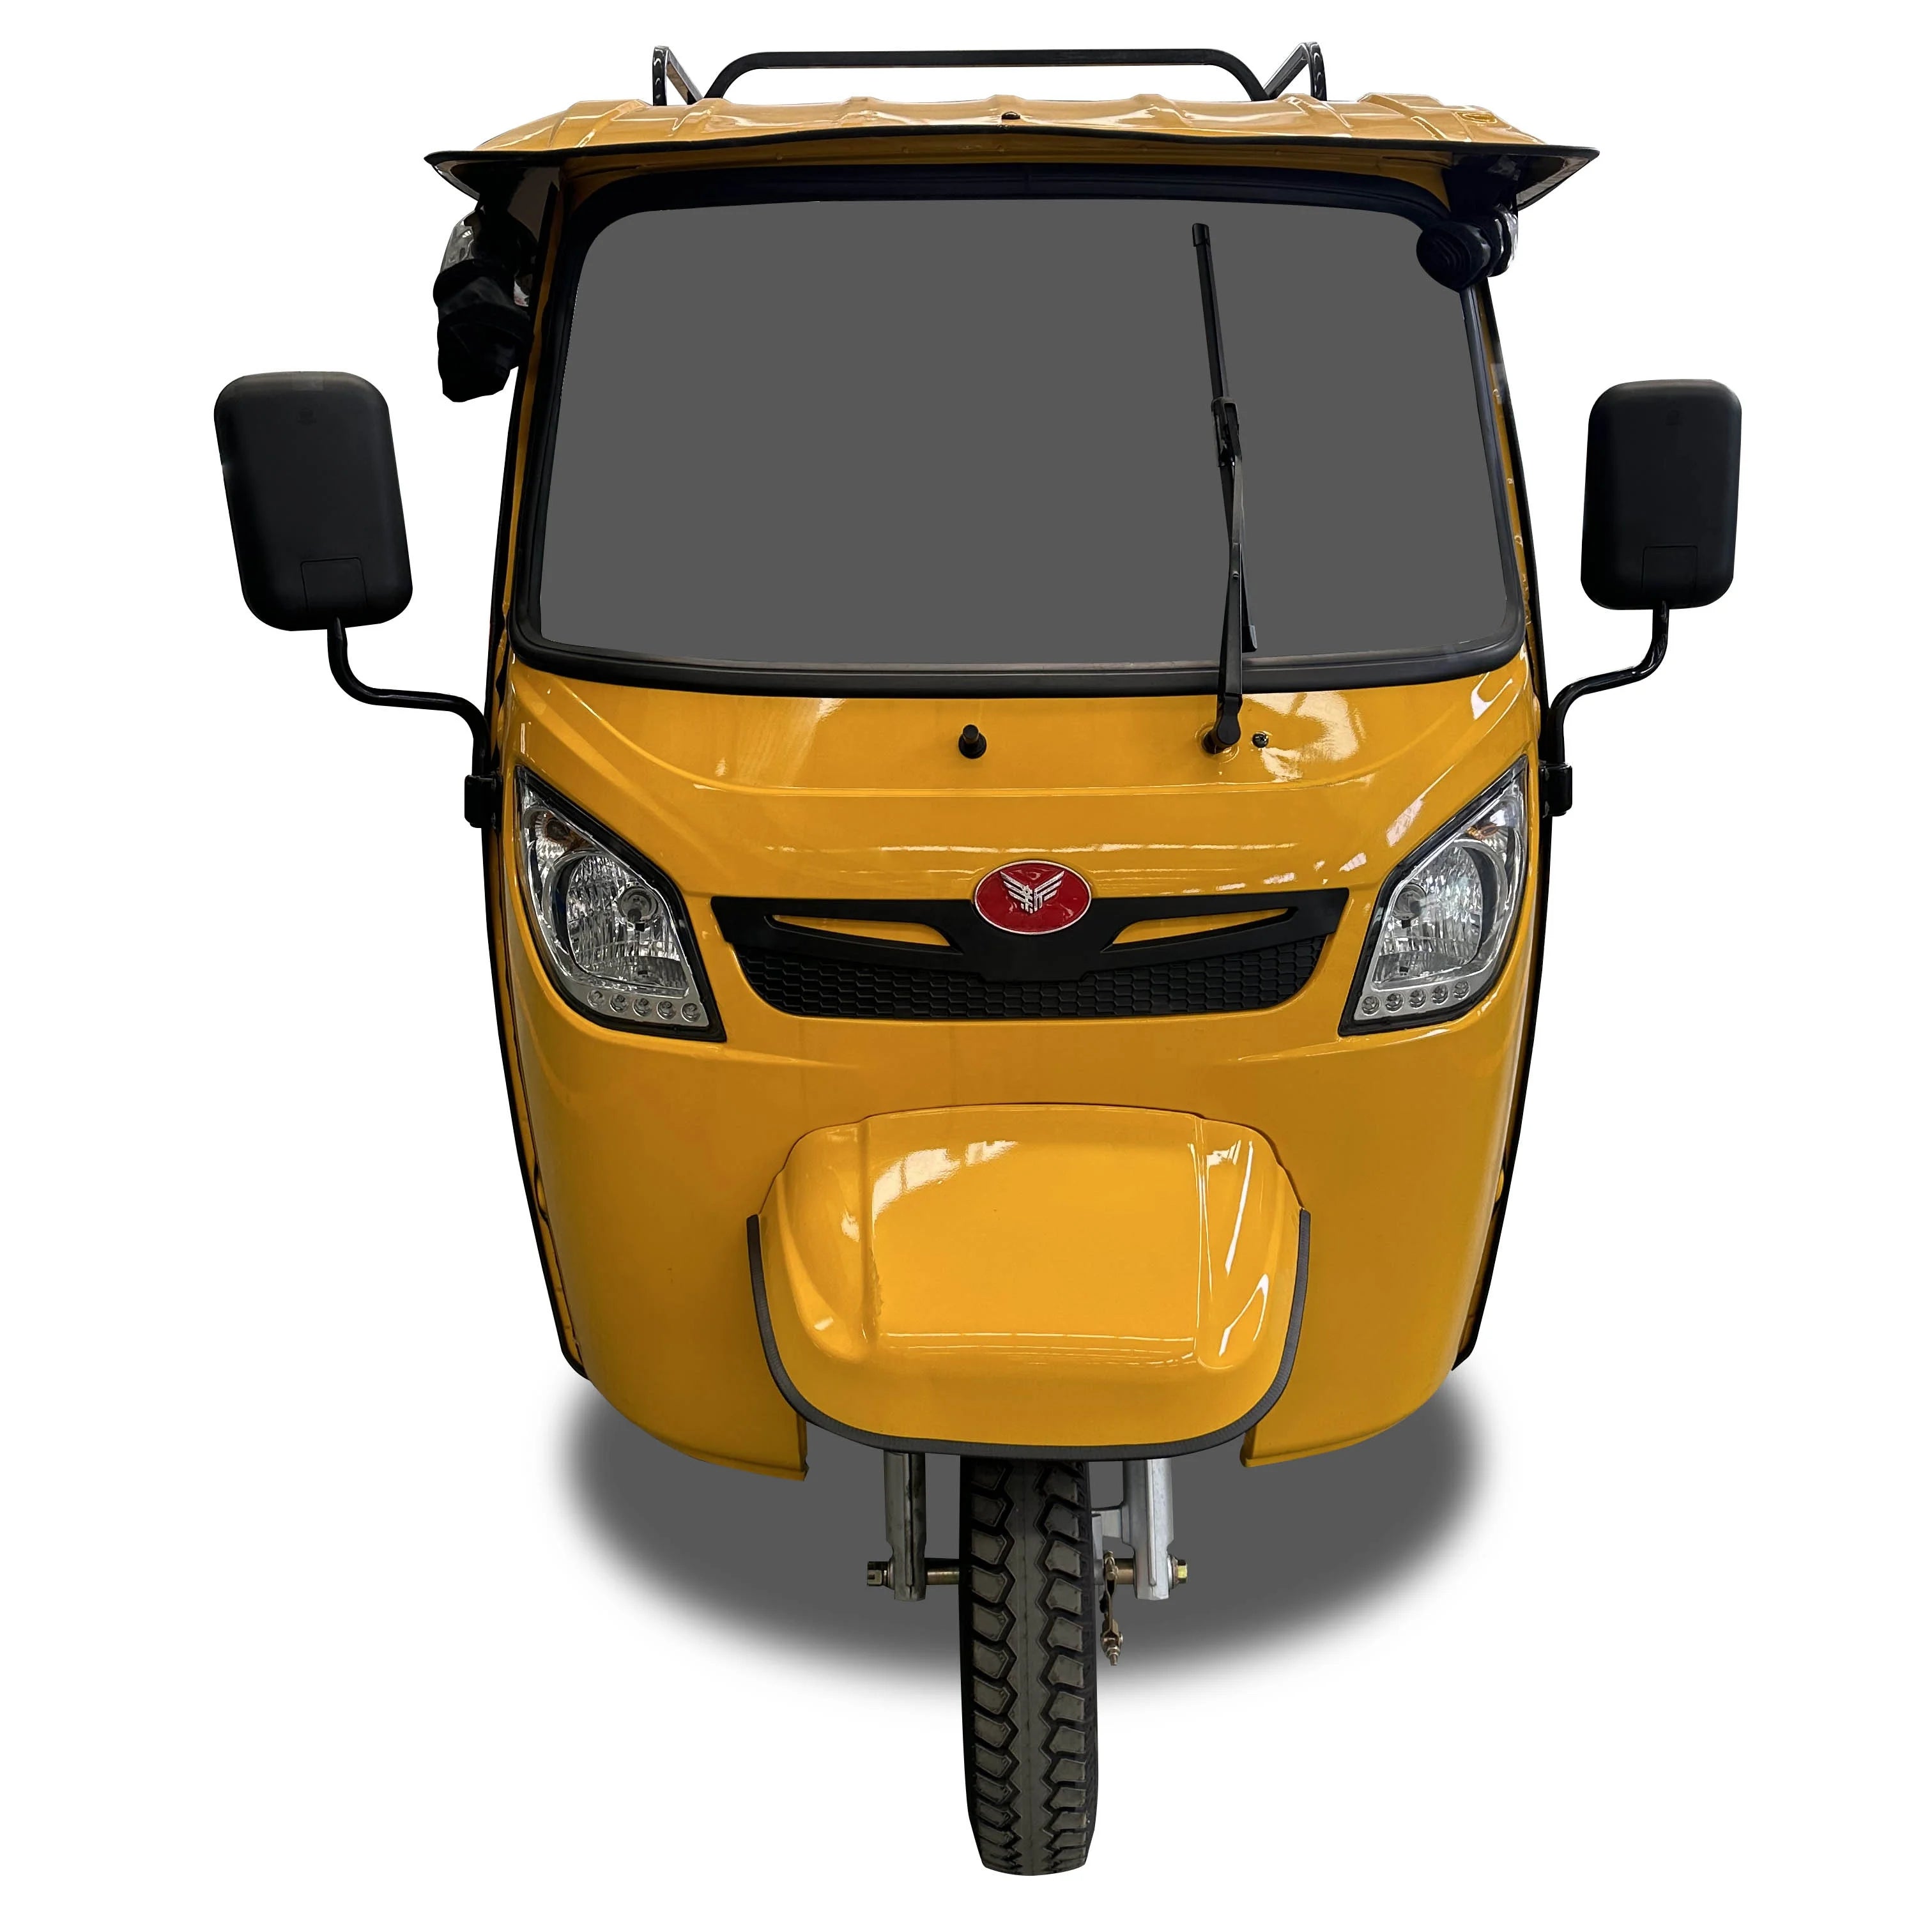 Passenger Motorized Tricycle Water Cooled Engine Gasoline Tricycle 9 Seats Three Wheel Moto Taxi